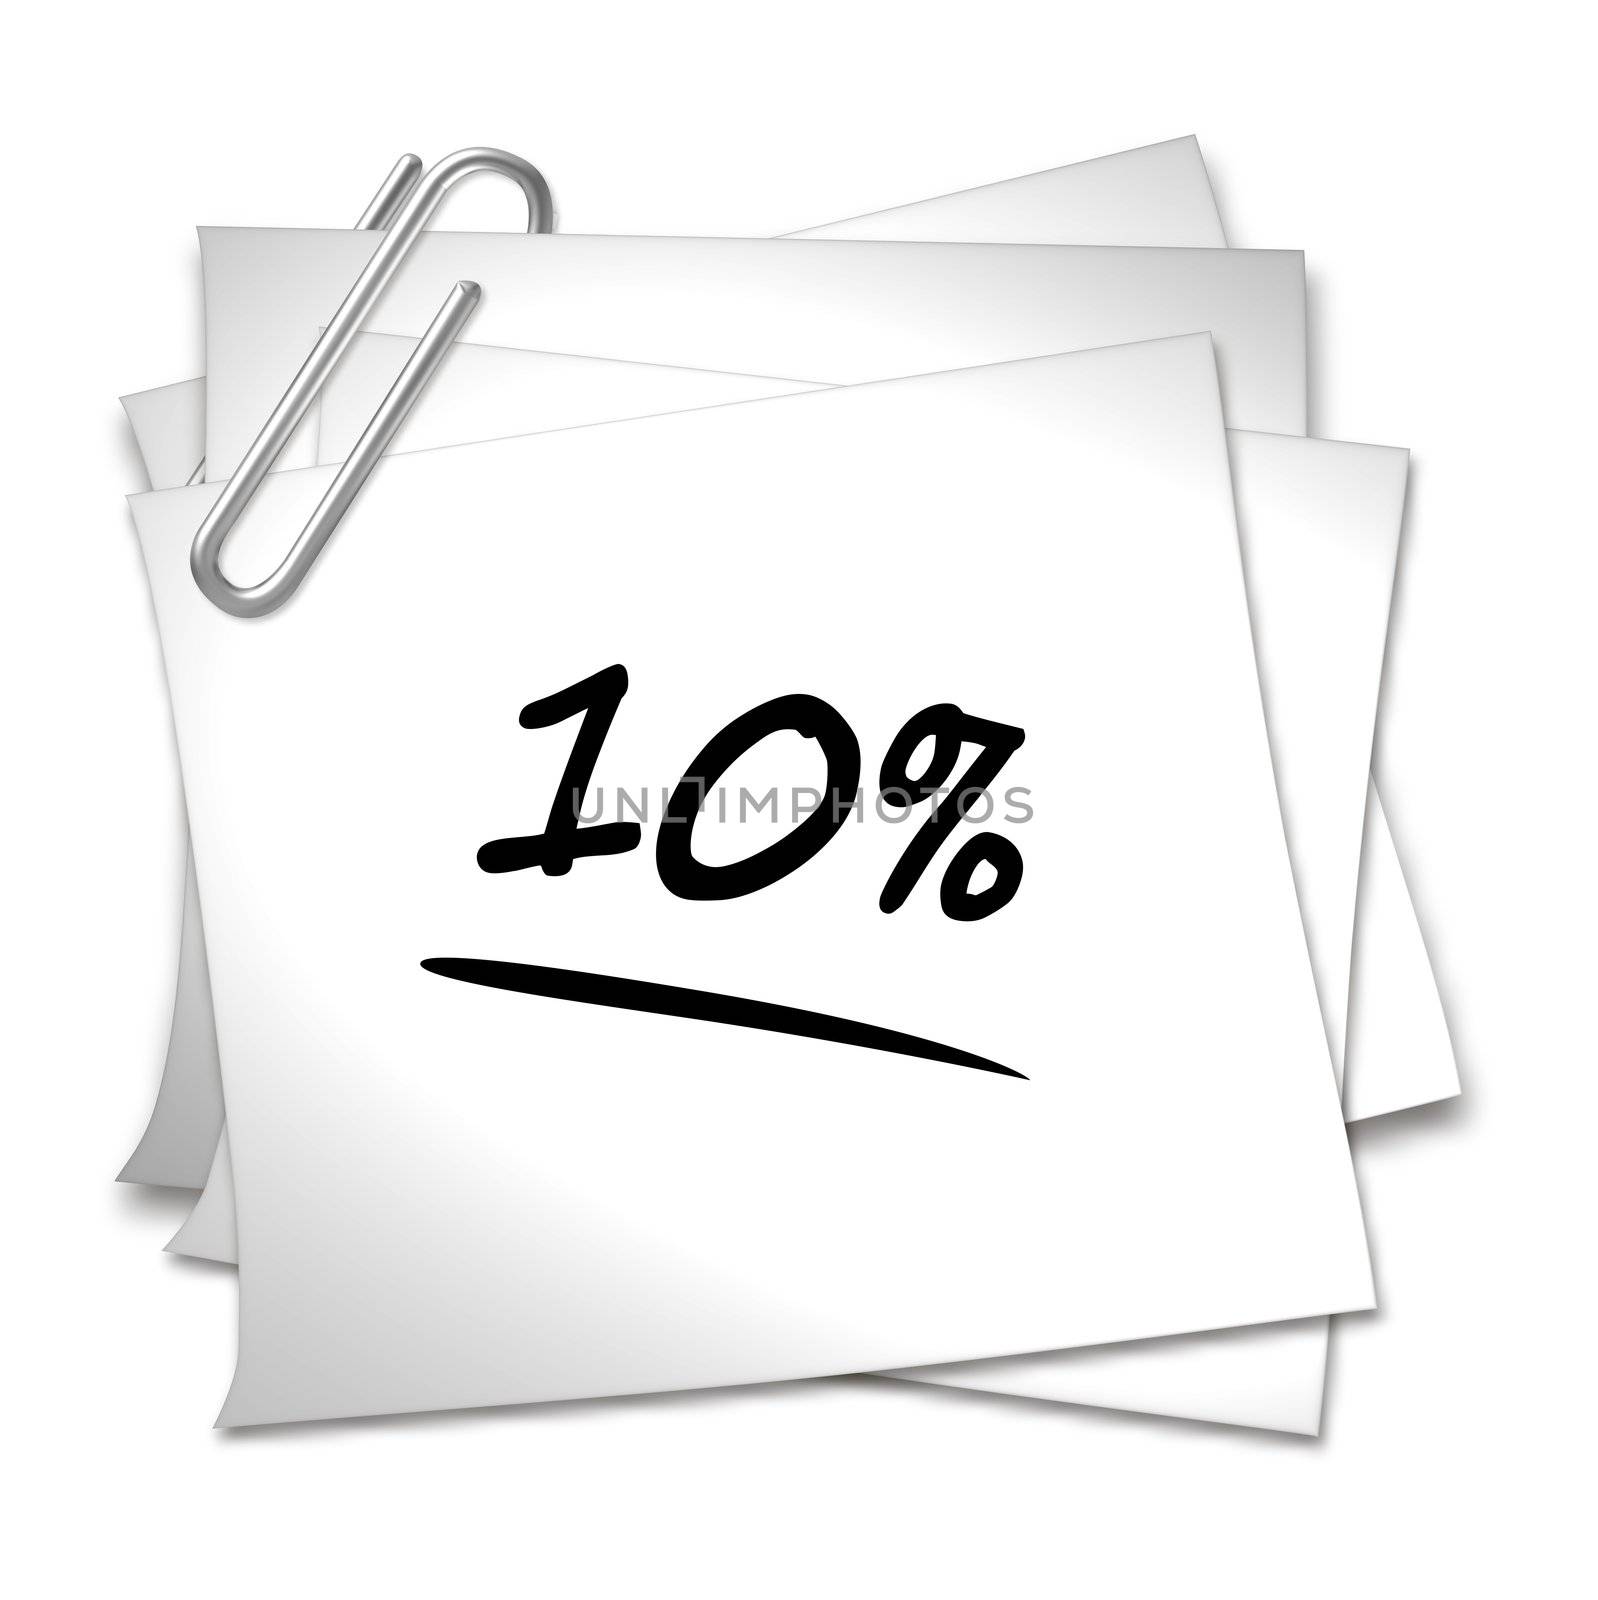 Memo with Paper Clip - 10 % by peromarketing